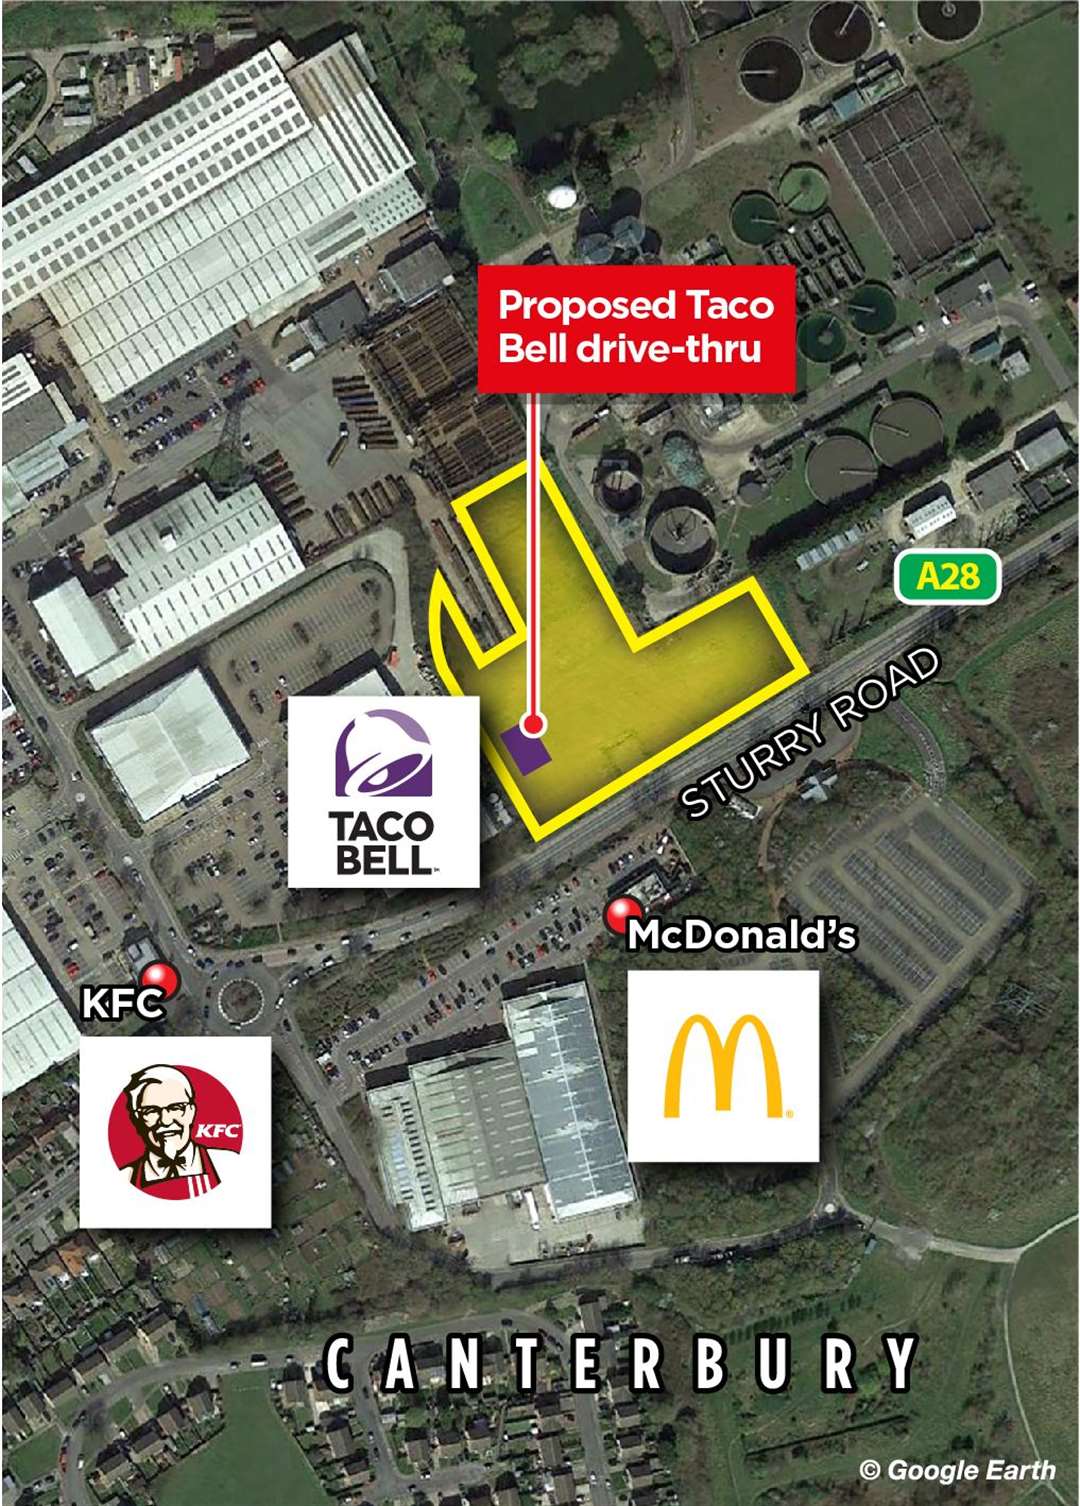 The Taco Bell will located near to branches of KFC and McDonald's in Sturry Road, Canterbury